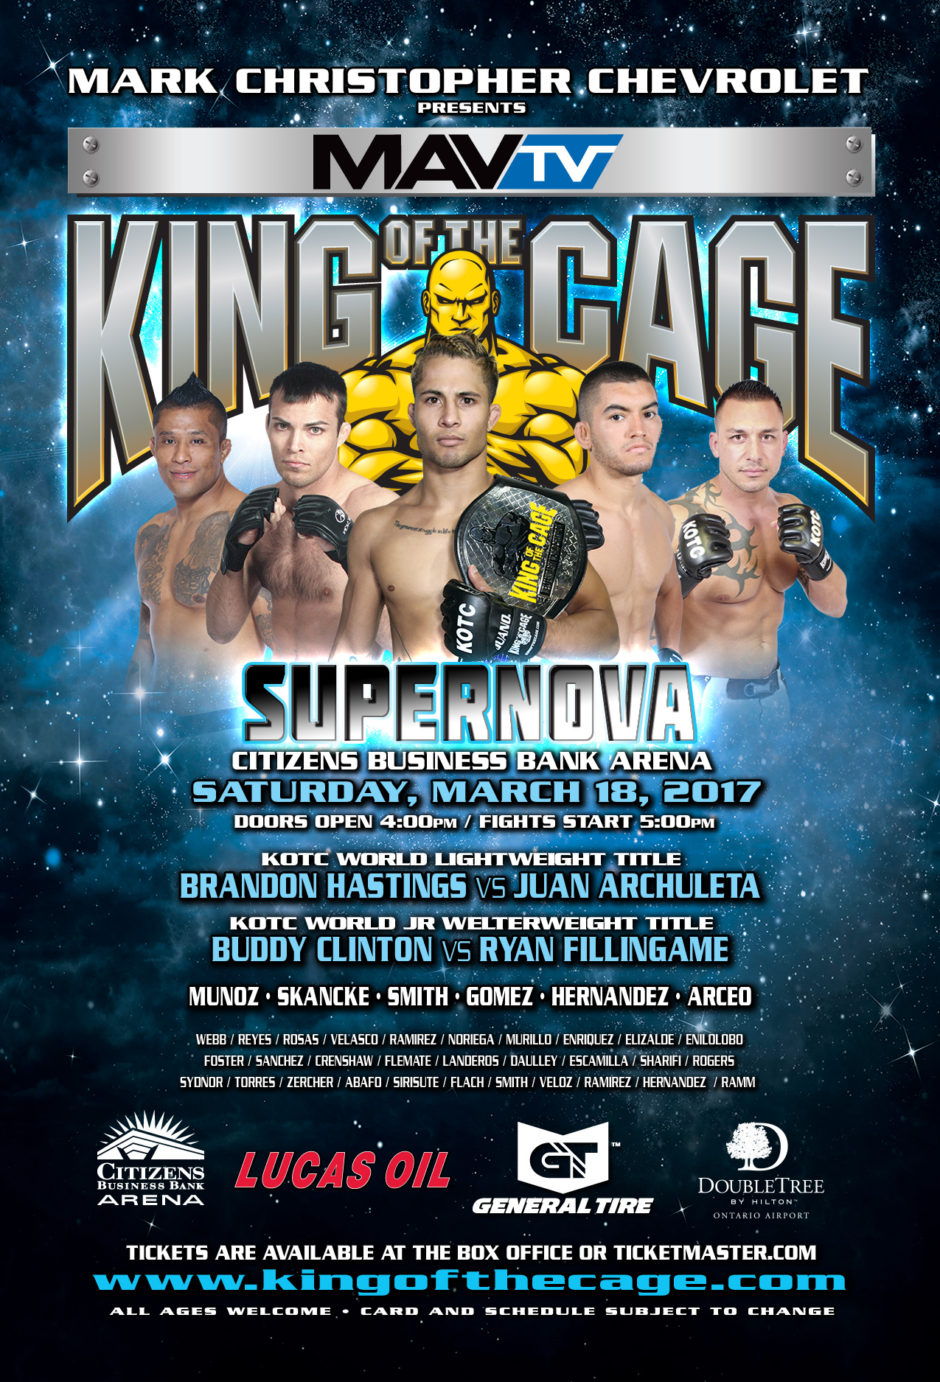 King of the Cage Returns to Citizens Business Bank Arena on March 18